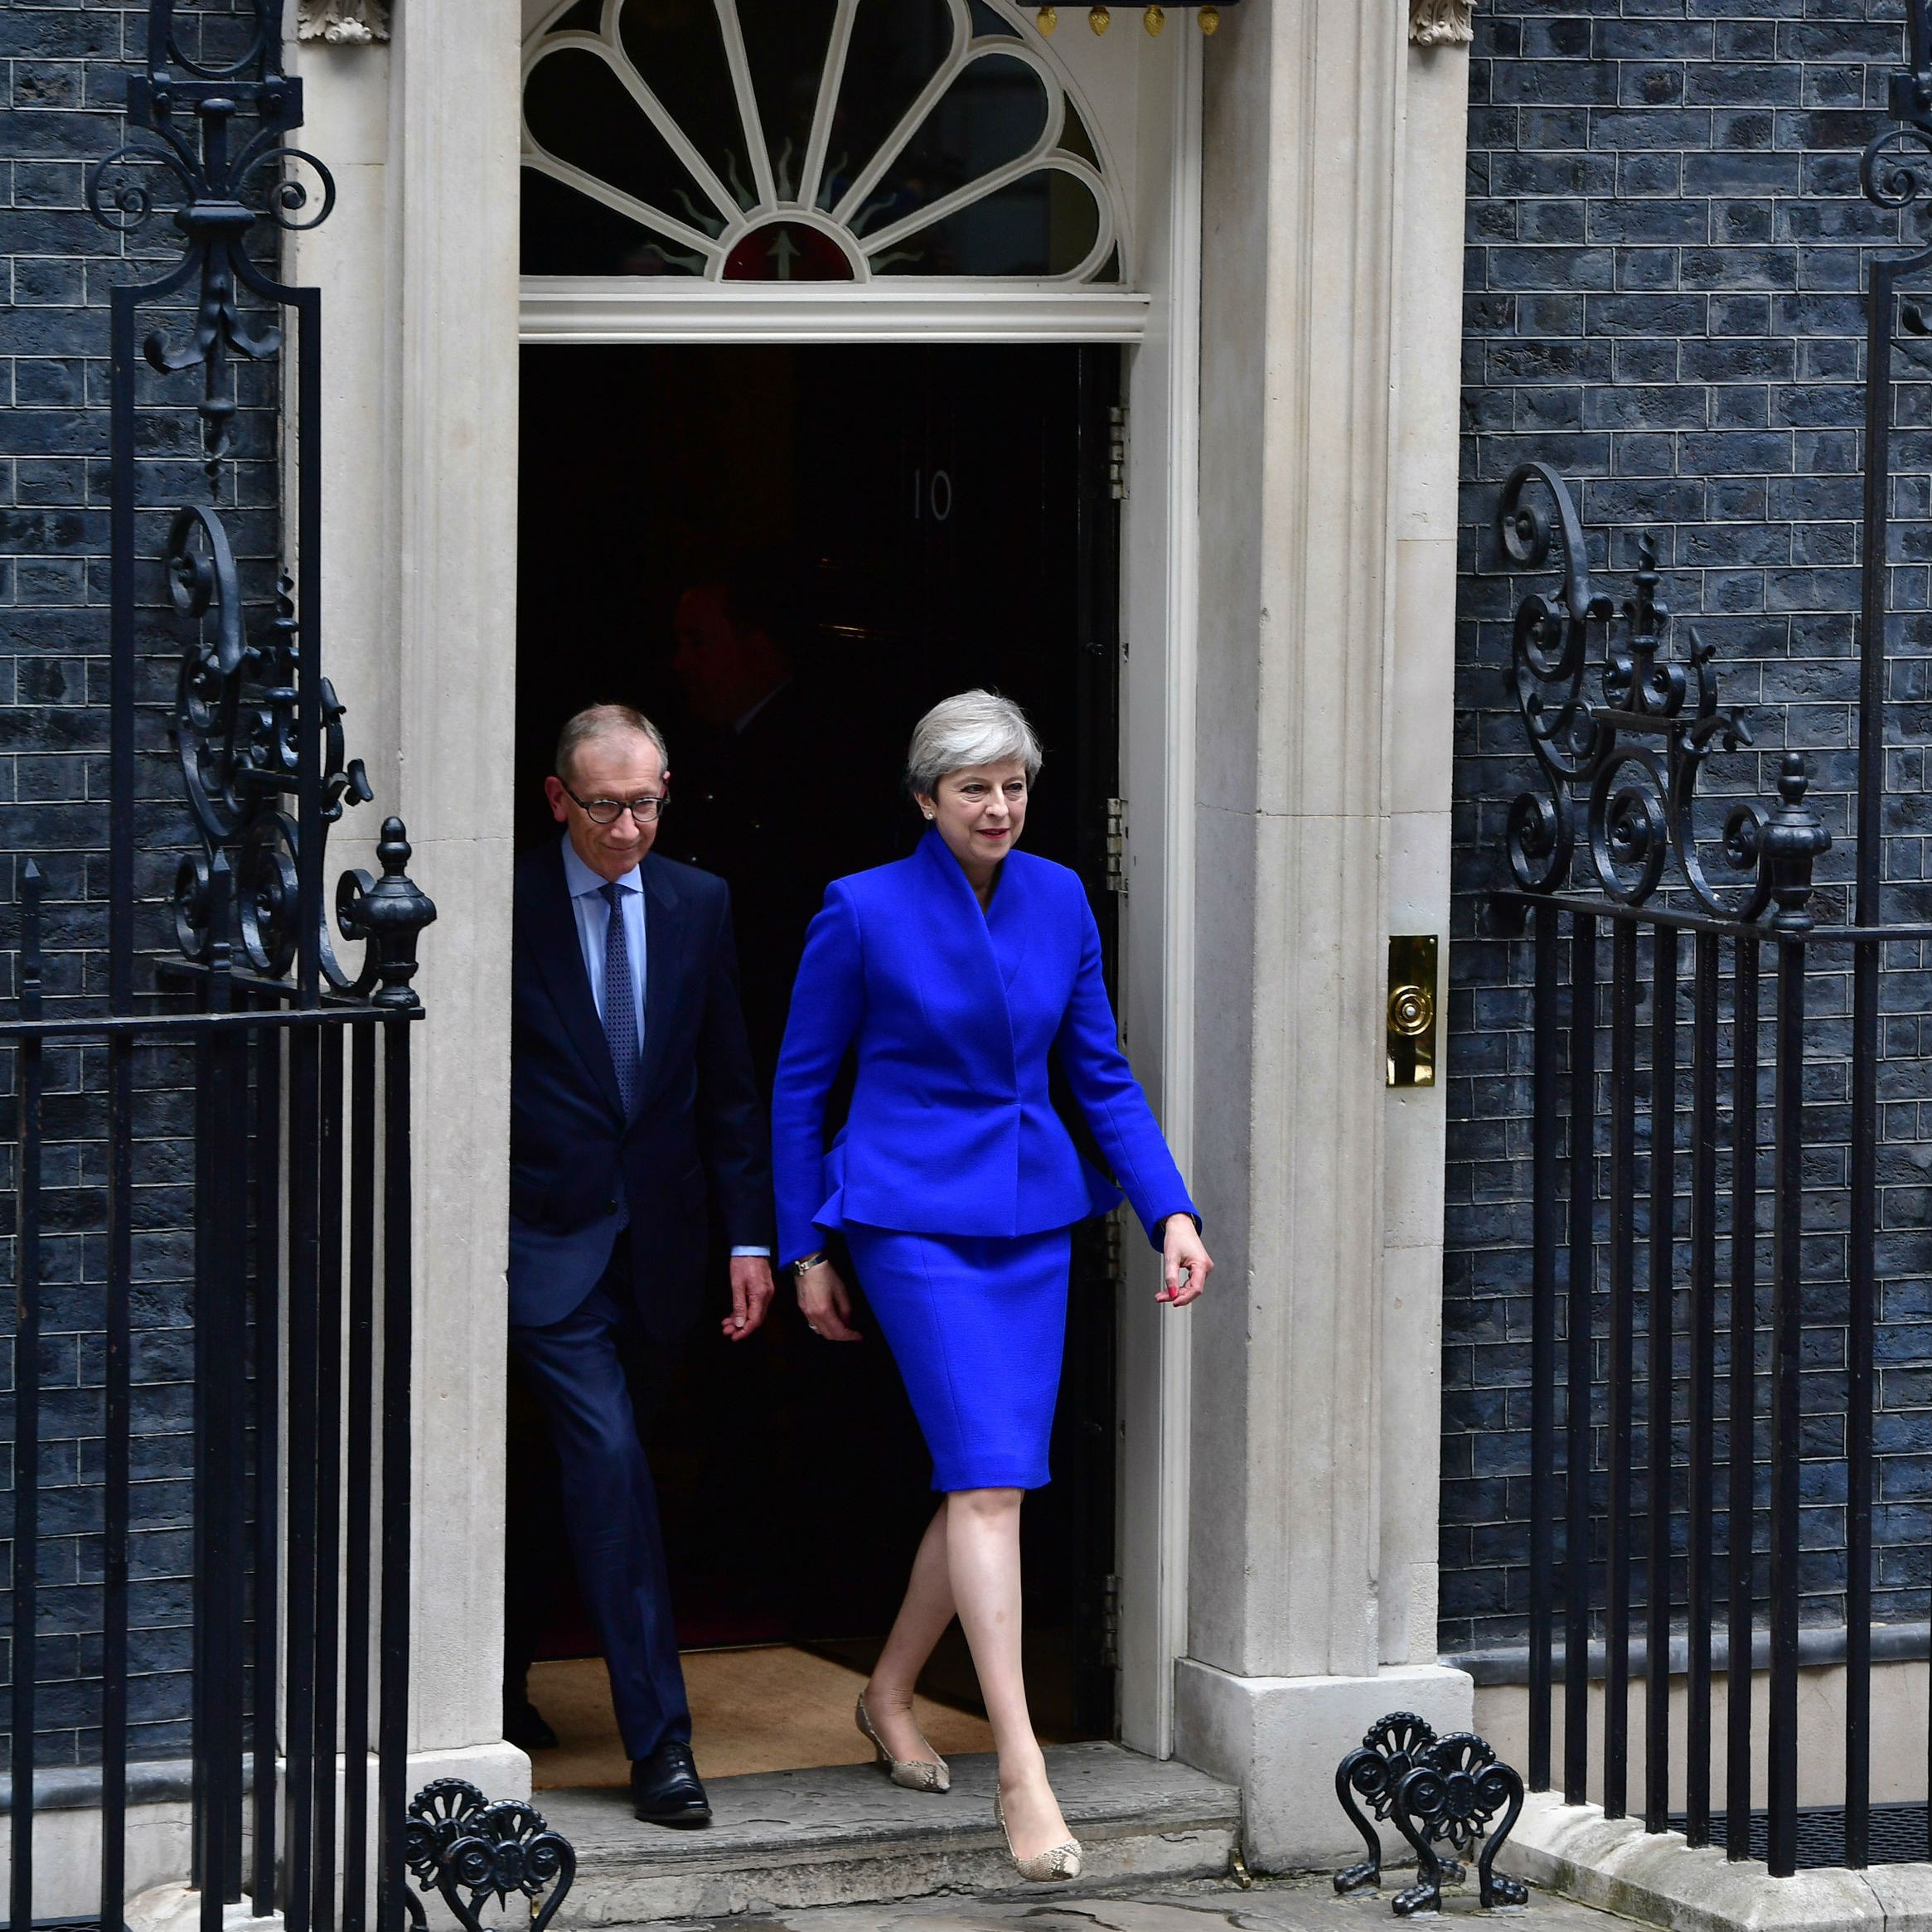 May strikes deal with DUP to form UK government as general election ends in hung parliament 